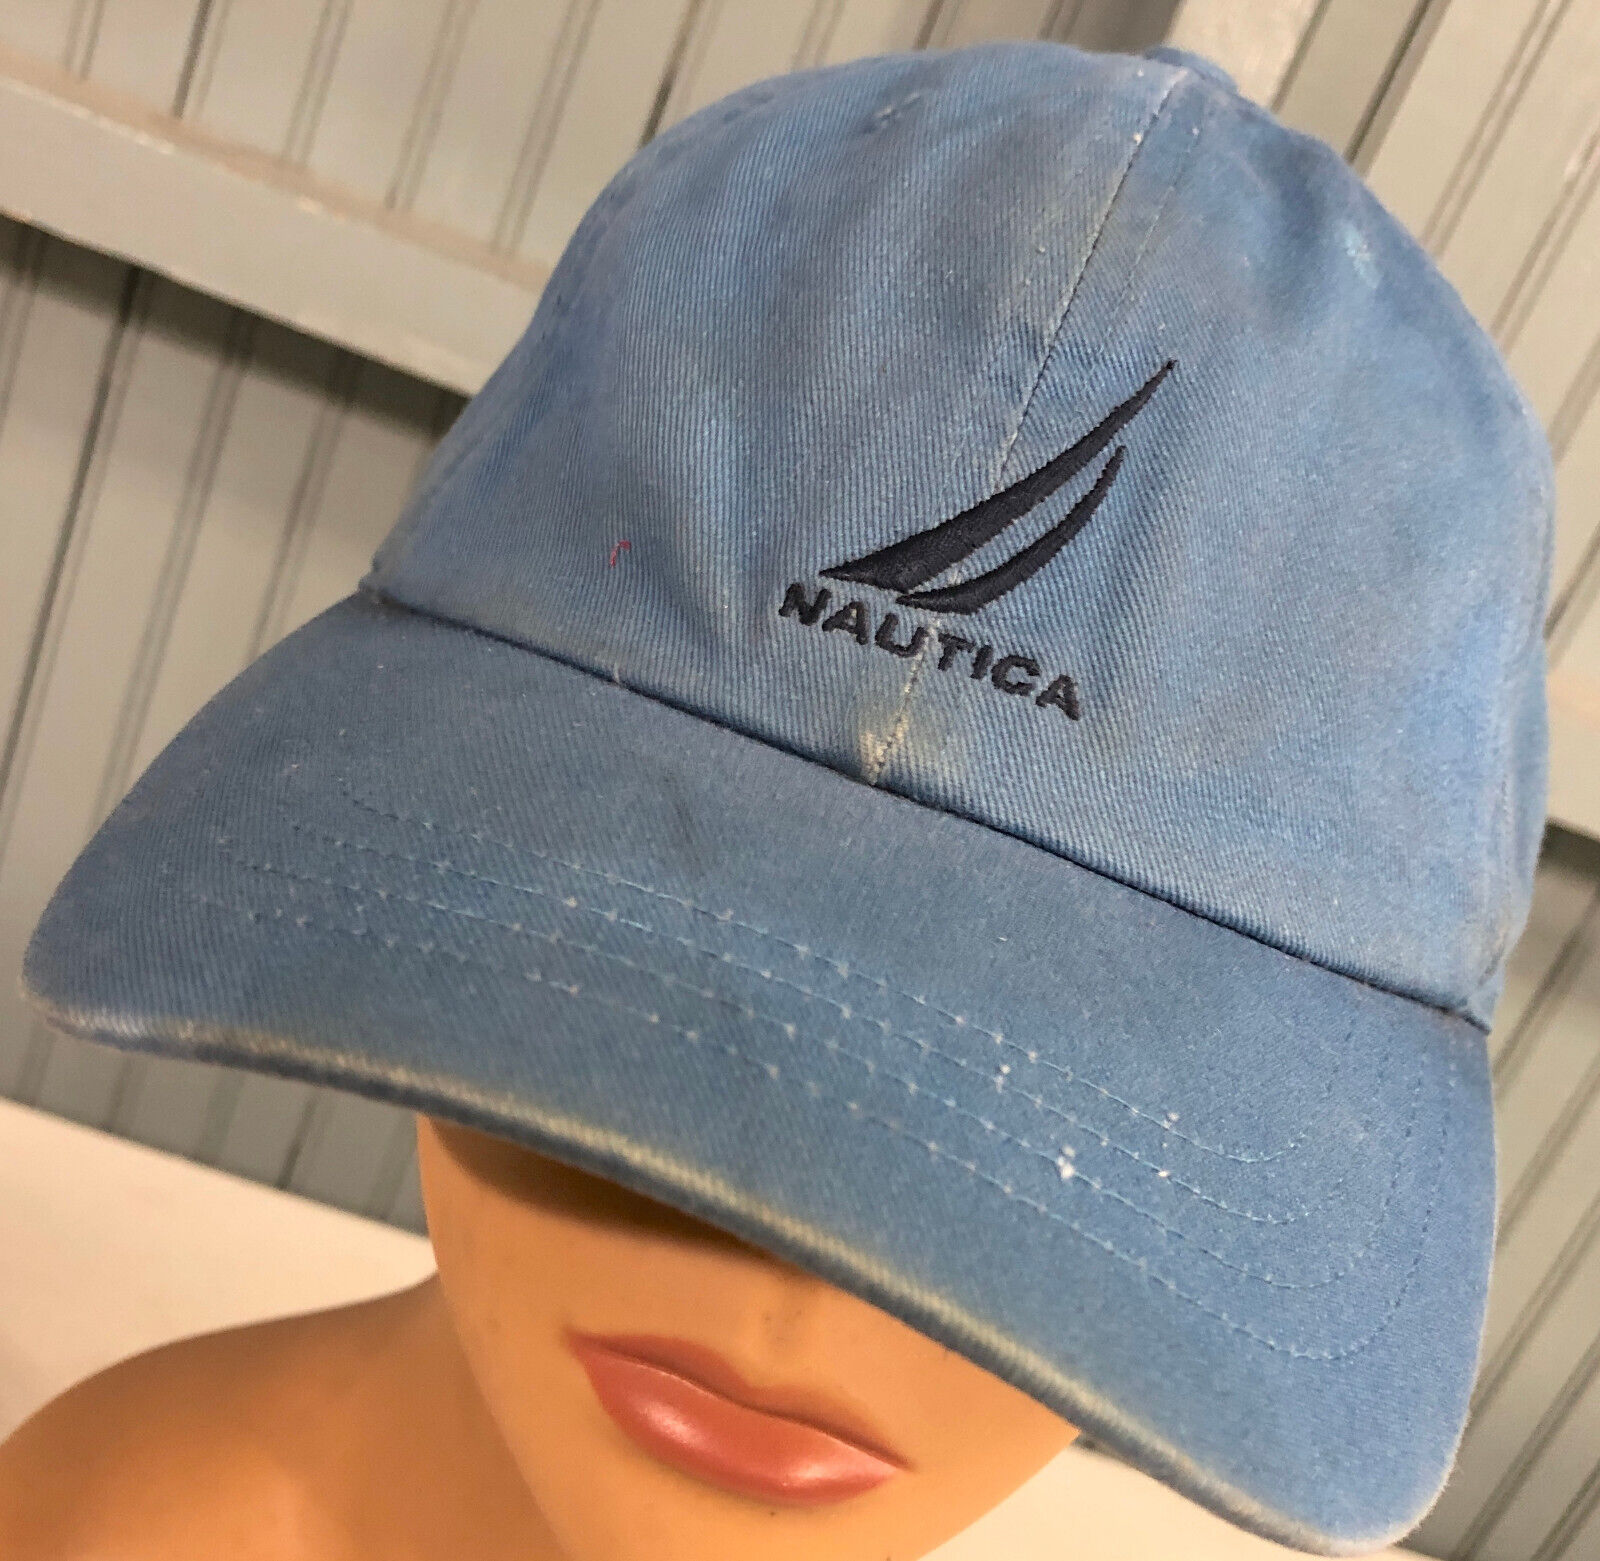 Primary image for Nautica Blue Beat Up Well Worn  Strapback Baseball Cap Hat